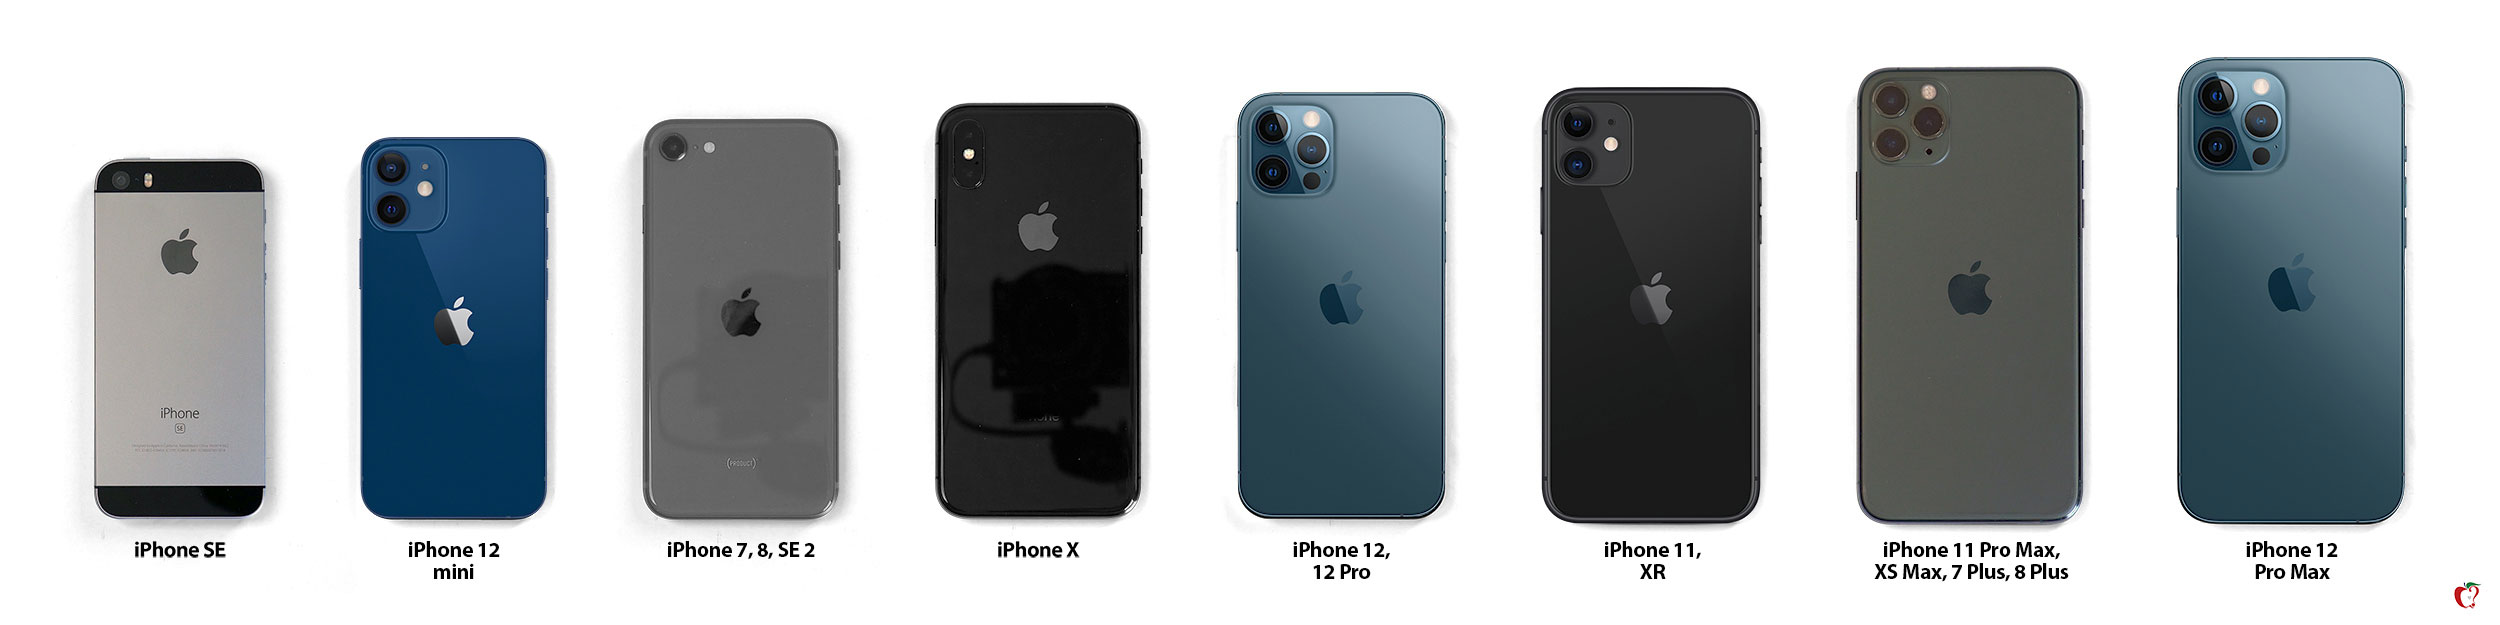 Iphone 12 Size Comparison All Iphone Models Side By Side Devsday Ru